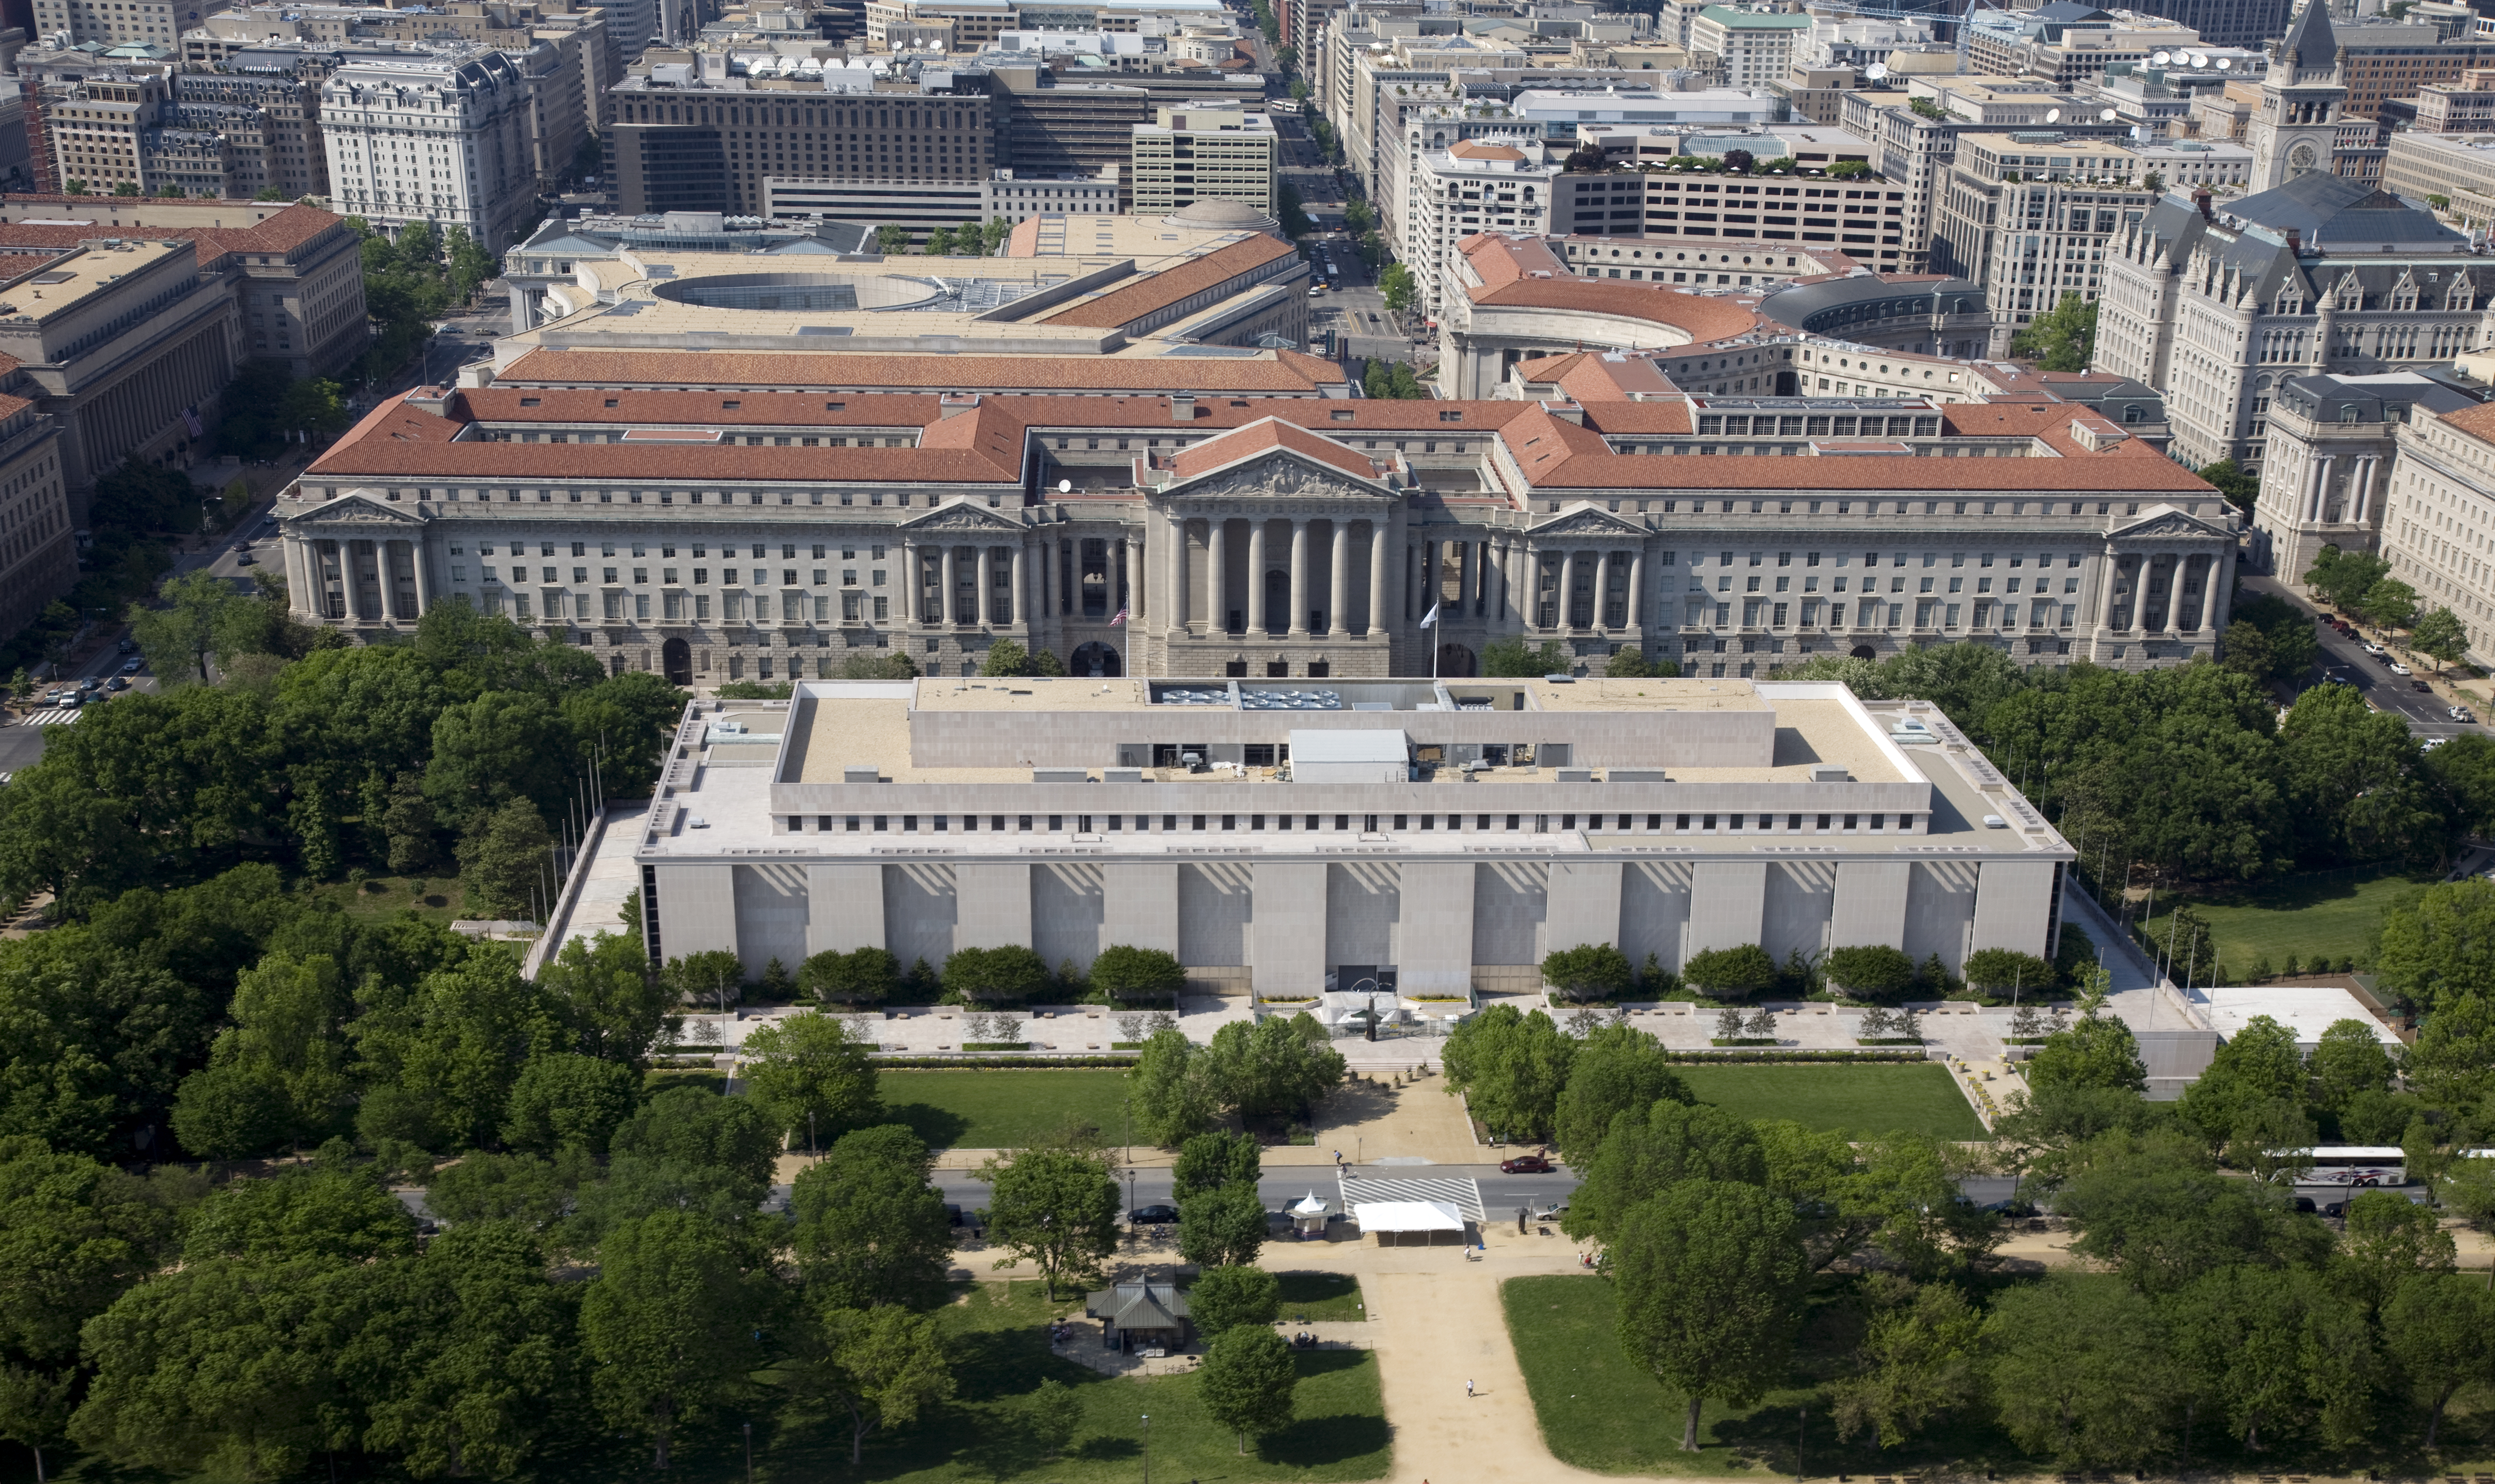 Aerial view of the National Museum of American History, located on the National Mall in Washington, D.C. The Andrew W. Mellon Auditorium, among other buildings in the Federal Triangle, is visible in the background. Photo taken on May 5, 2008.